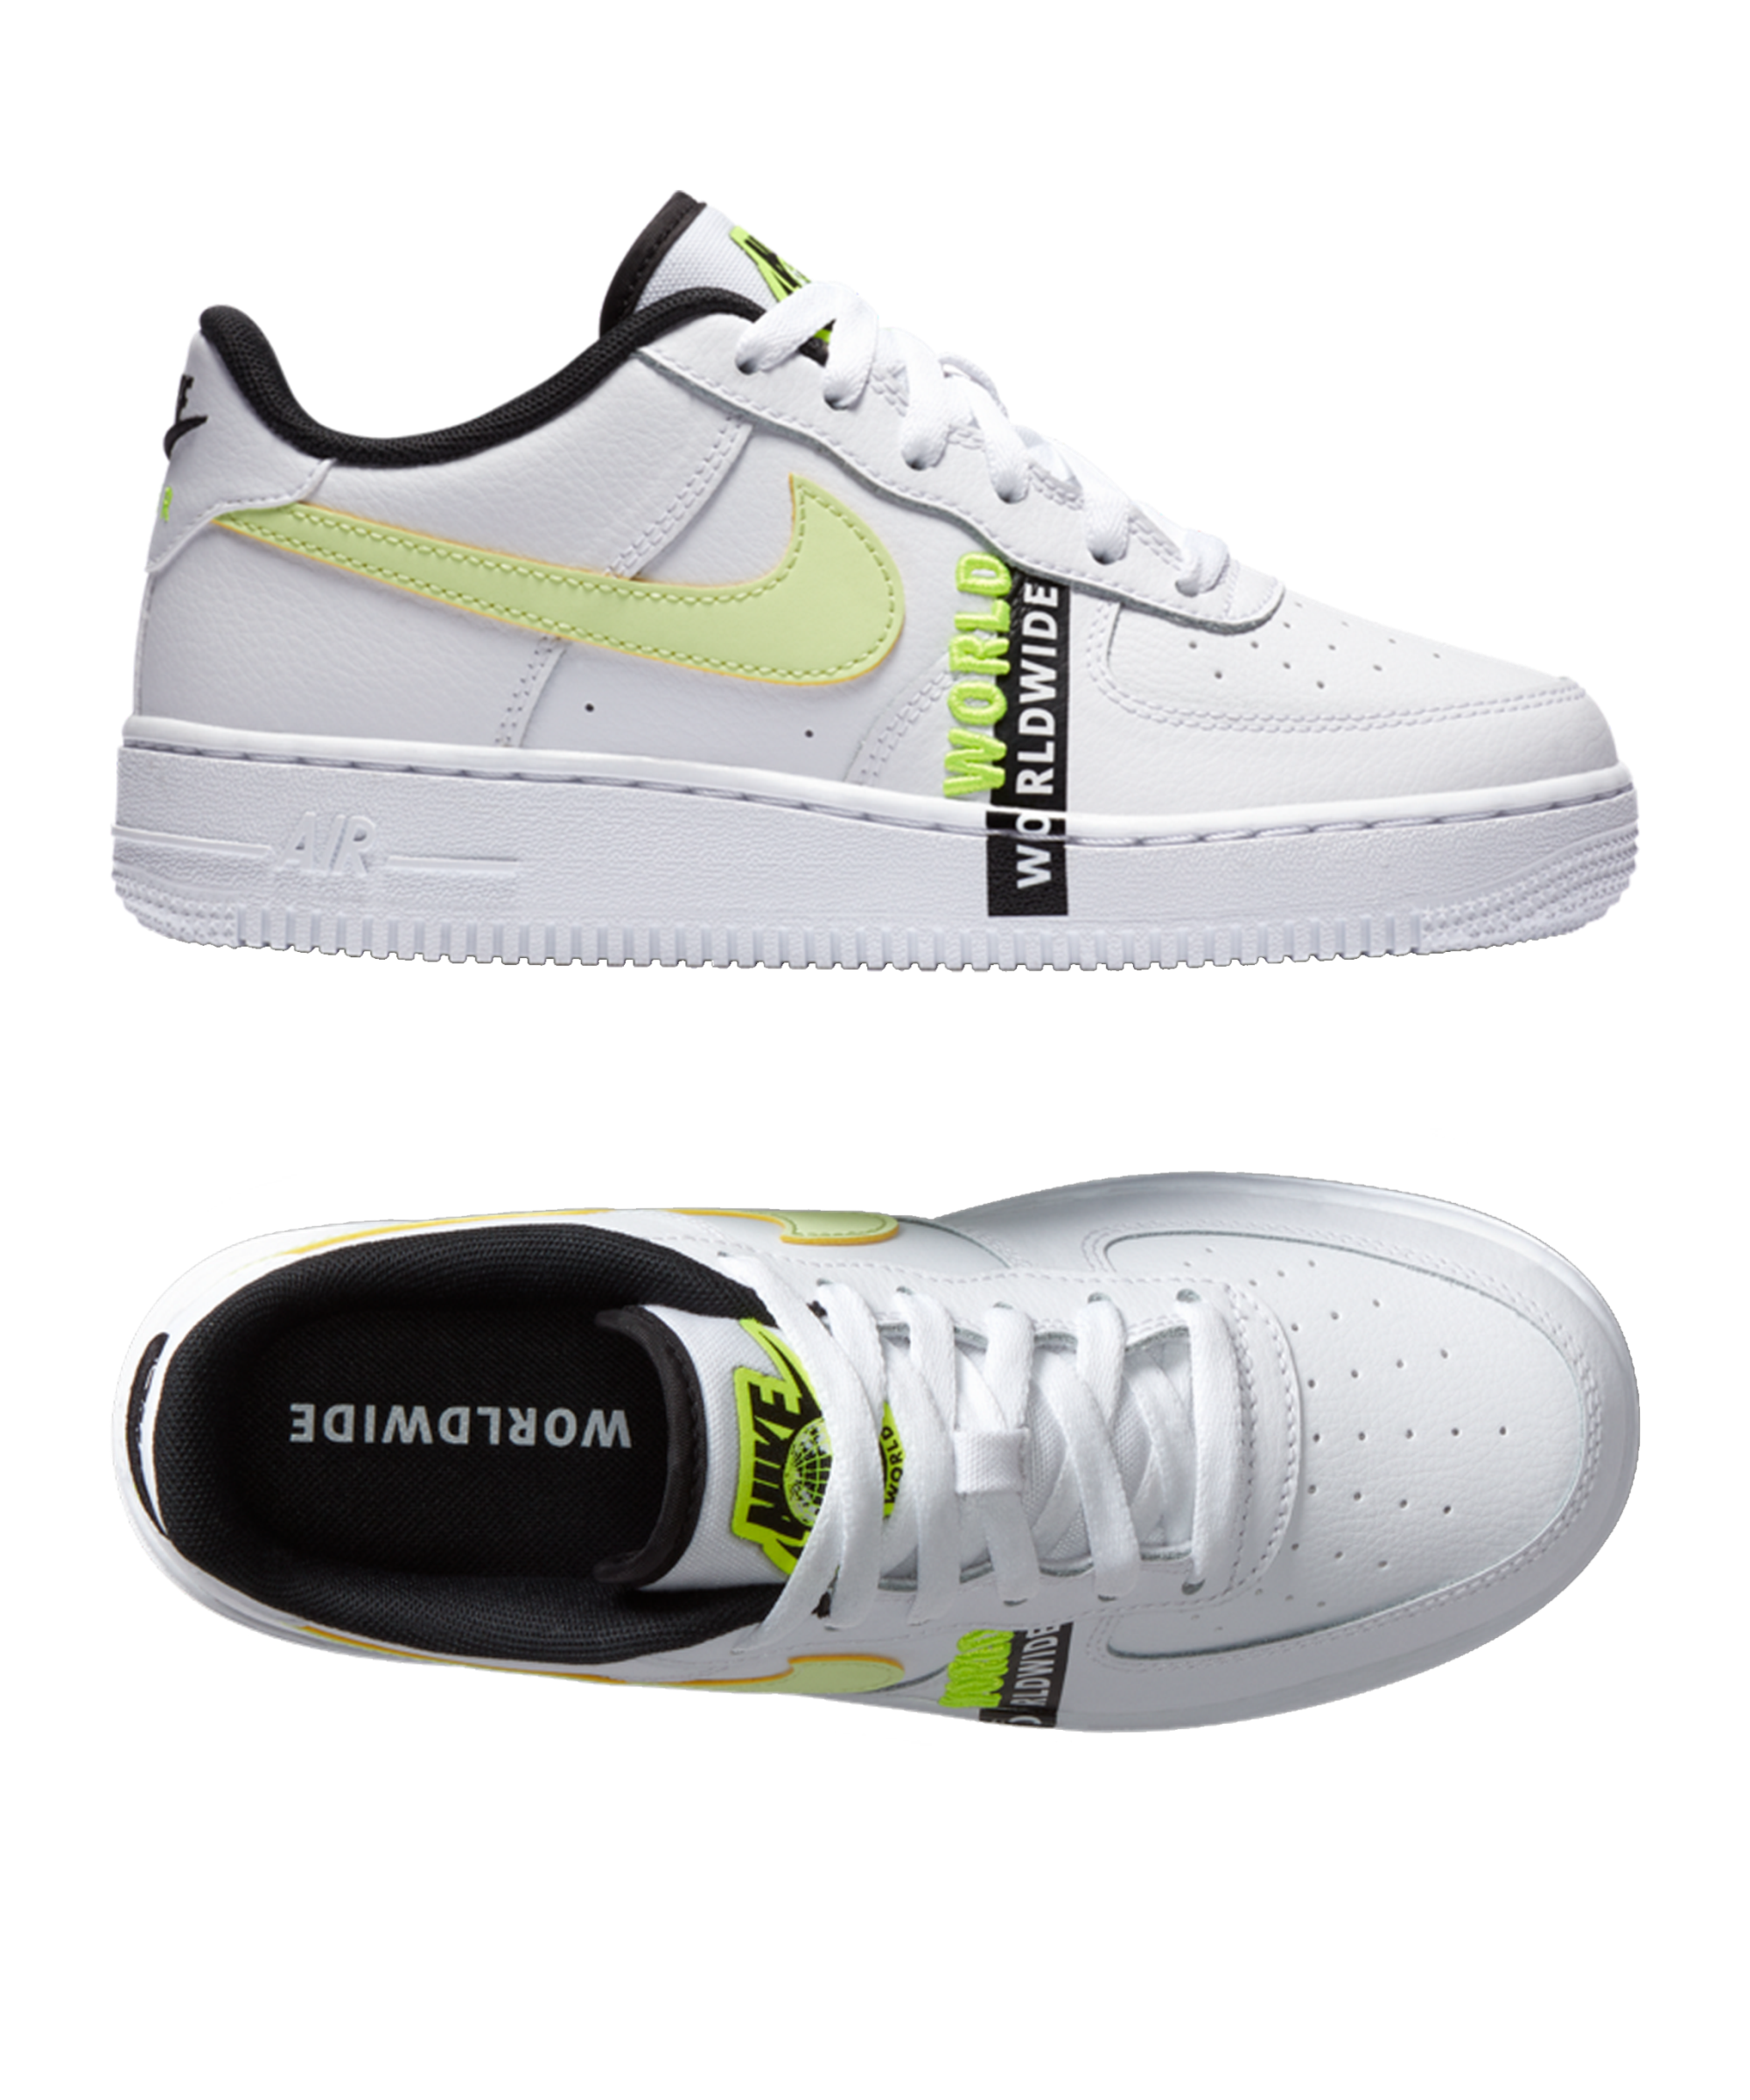 Nike Kids Air Force 1 LV8 2 (GS) Sneakers - White